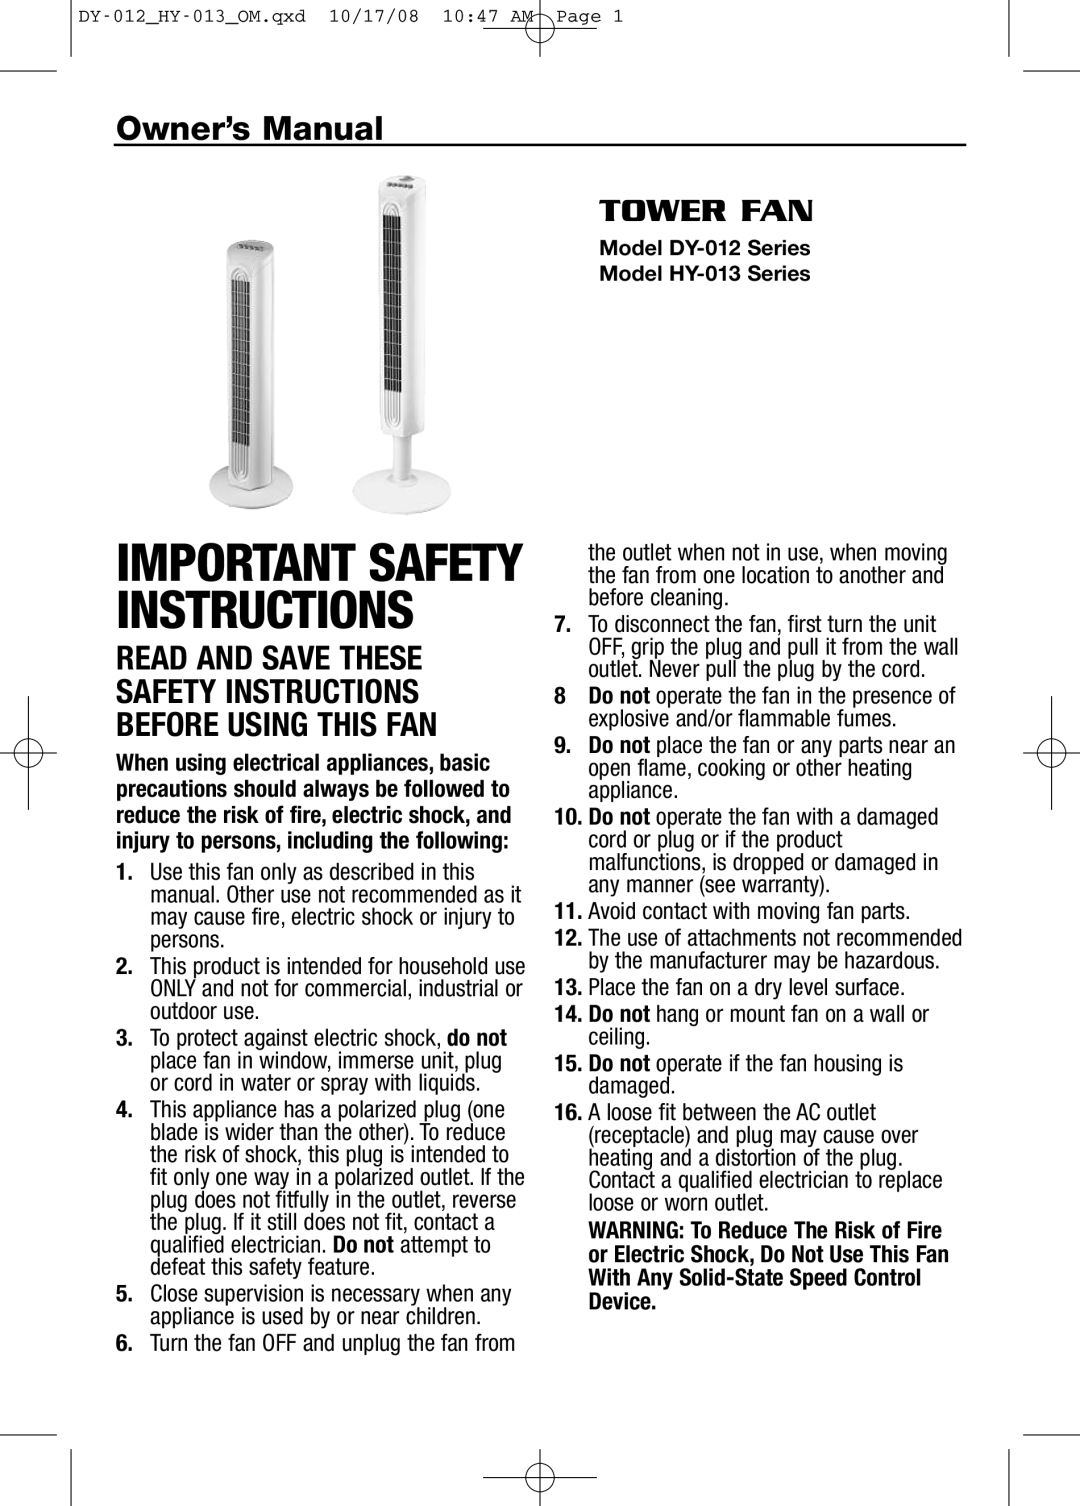 Honeywell HY013 important safety instructions Owner’s Manual, Tower Fan, Important Safety Instructions 